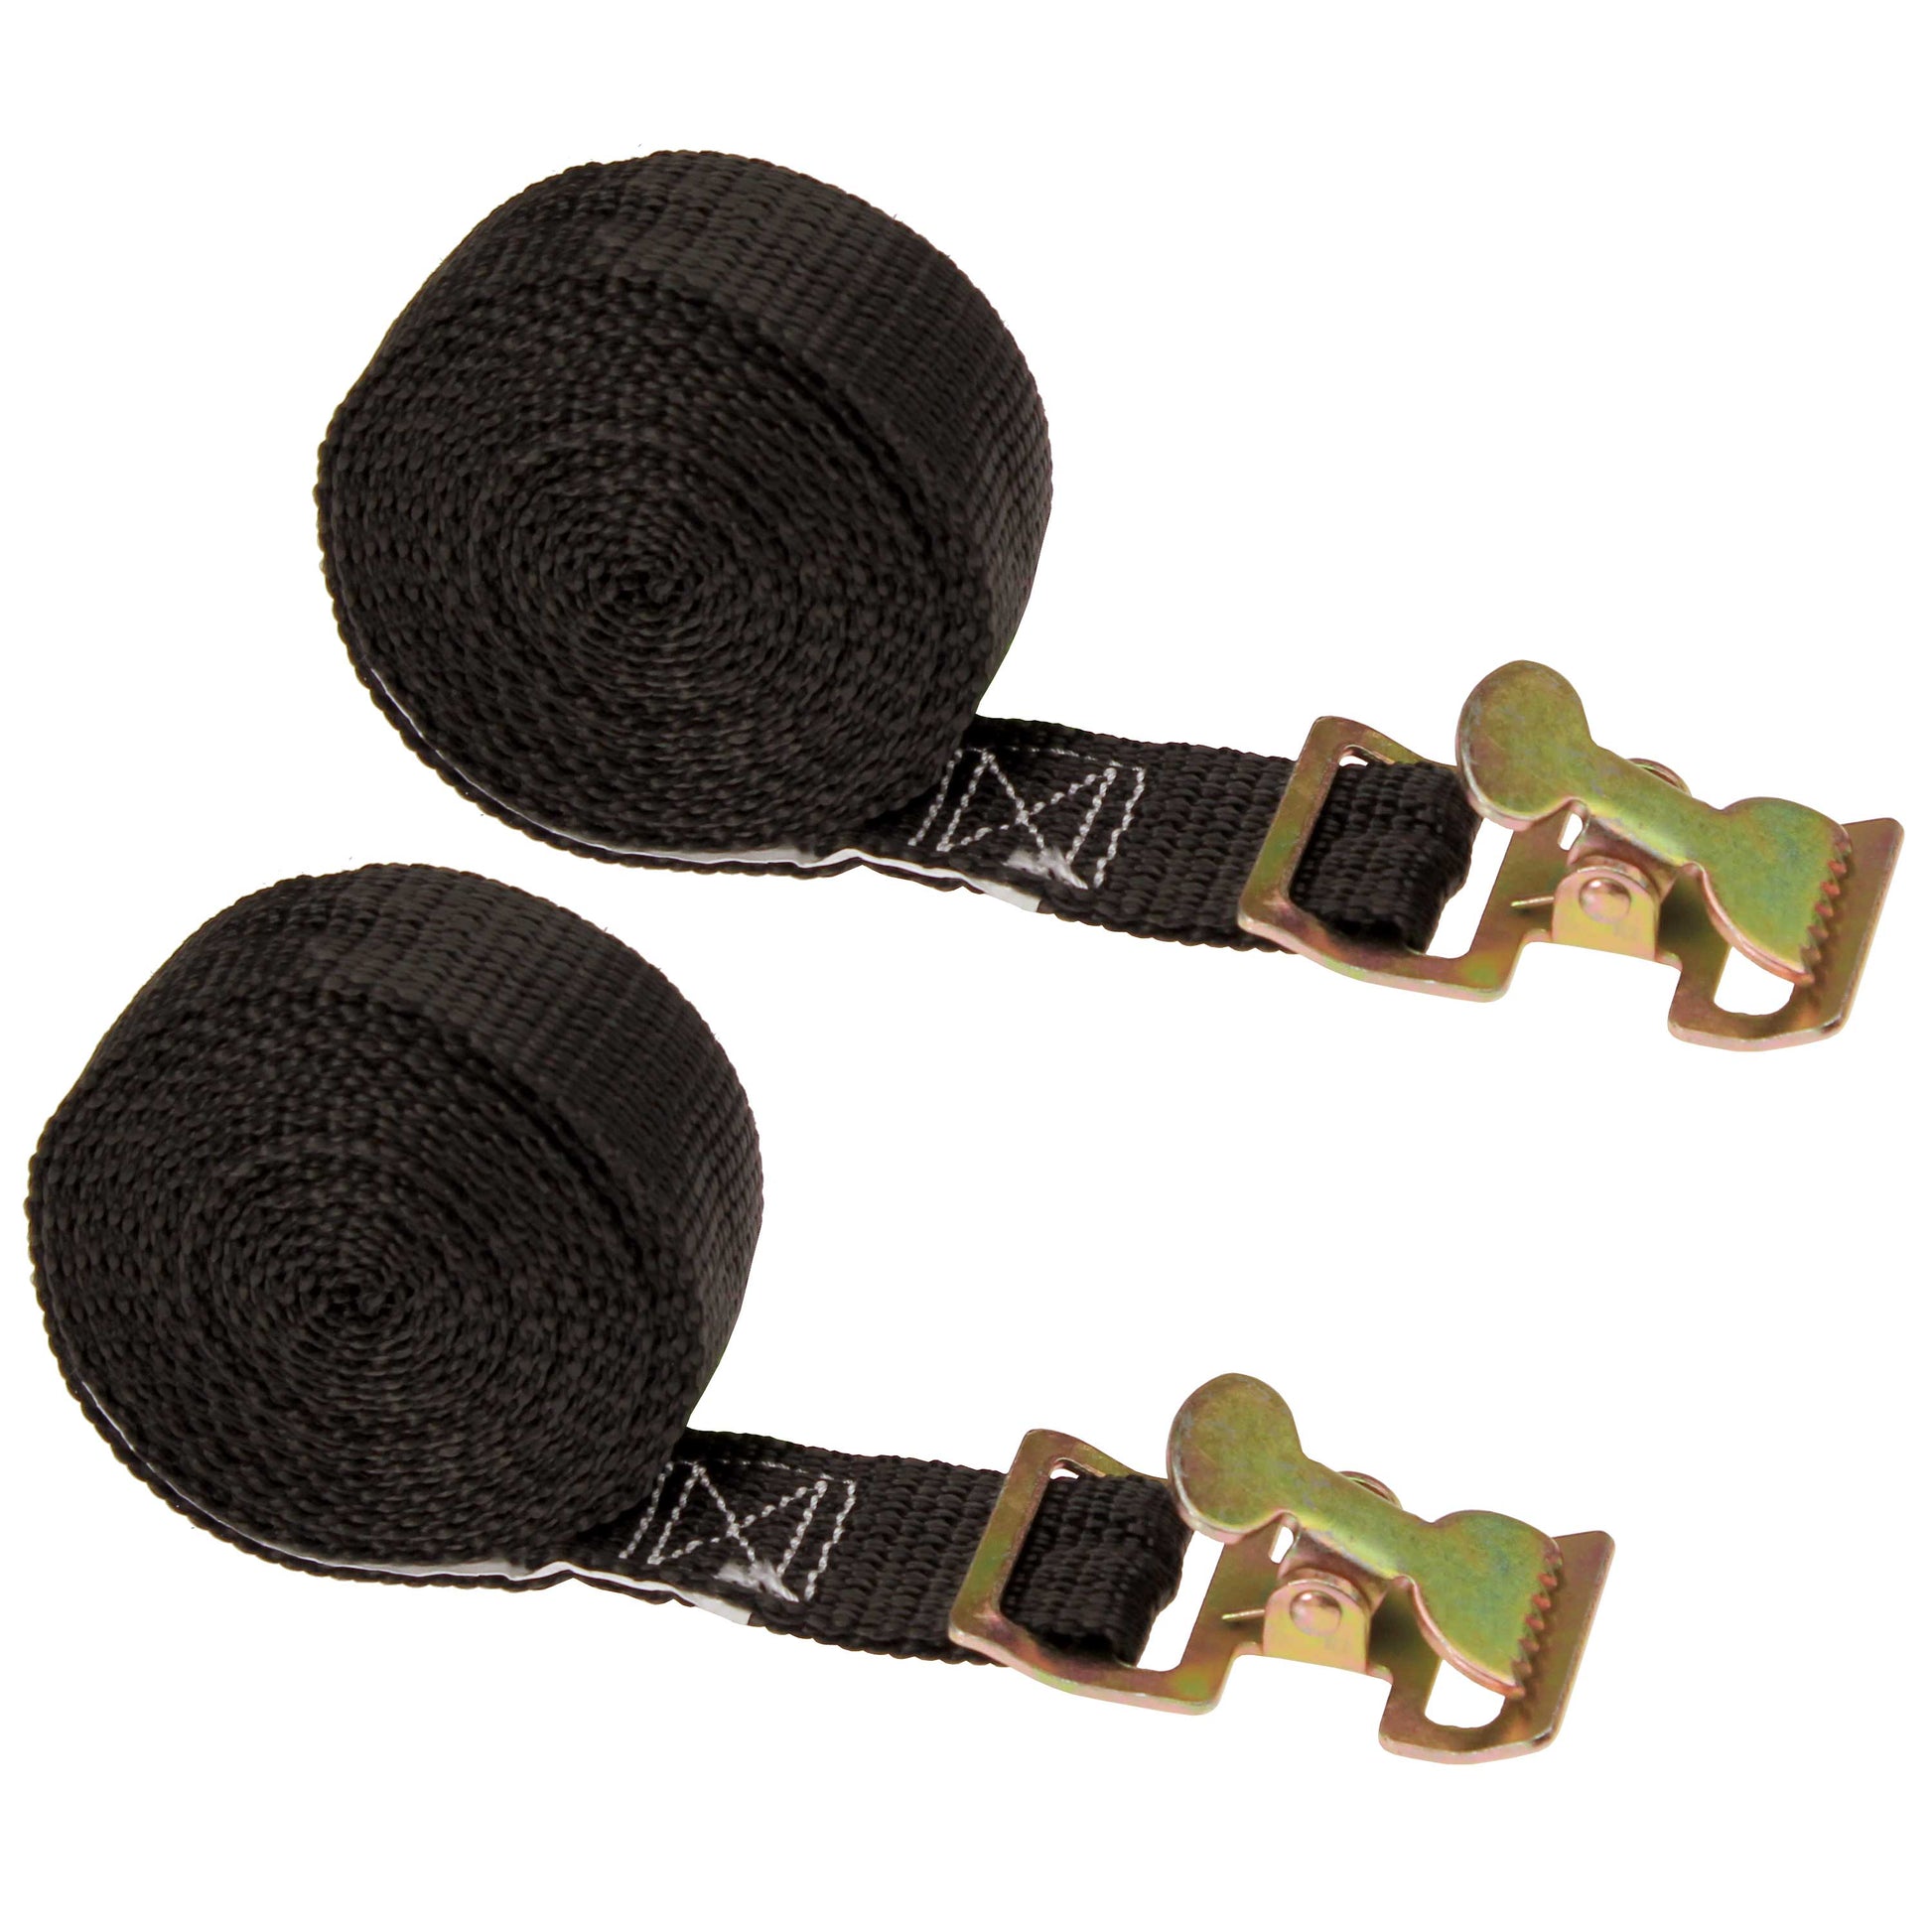 1 inch x 8 foot Black Action Spring Buckle Strap 2 pack